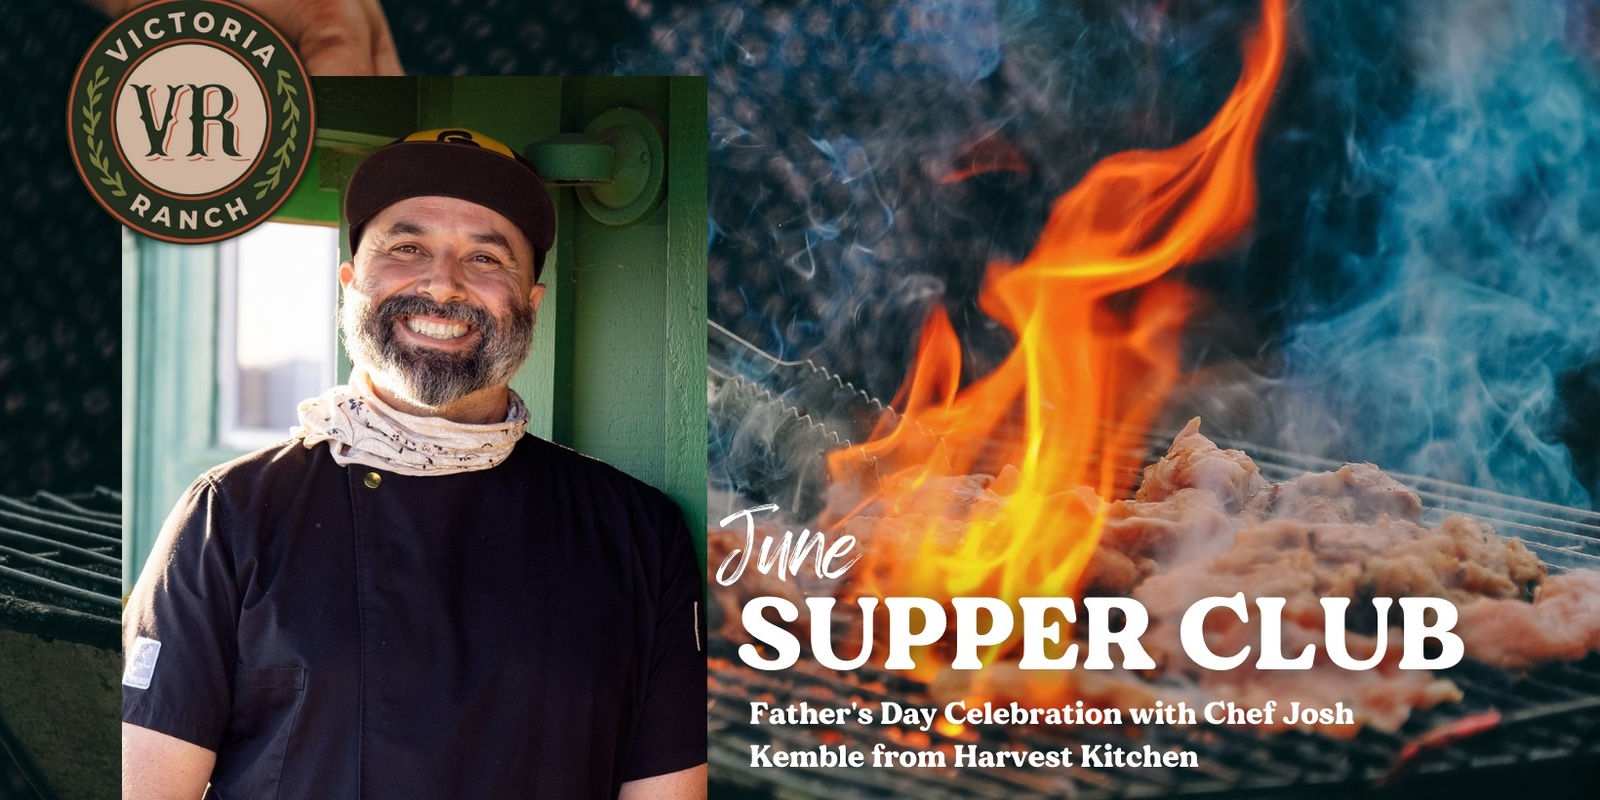 Banner image for Victoria Ranch Supper Club: Father’s Day Celebration with Chef Josh Kemble